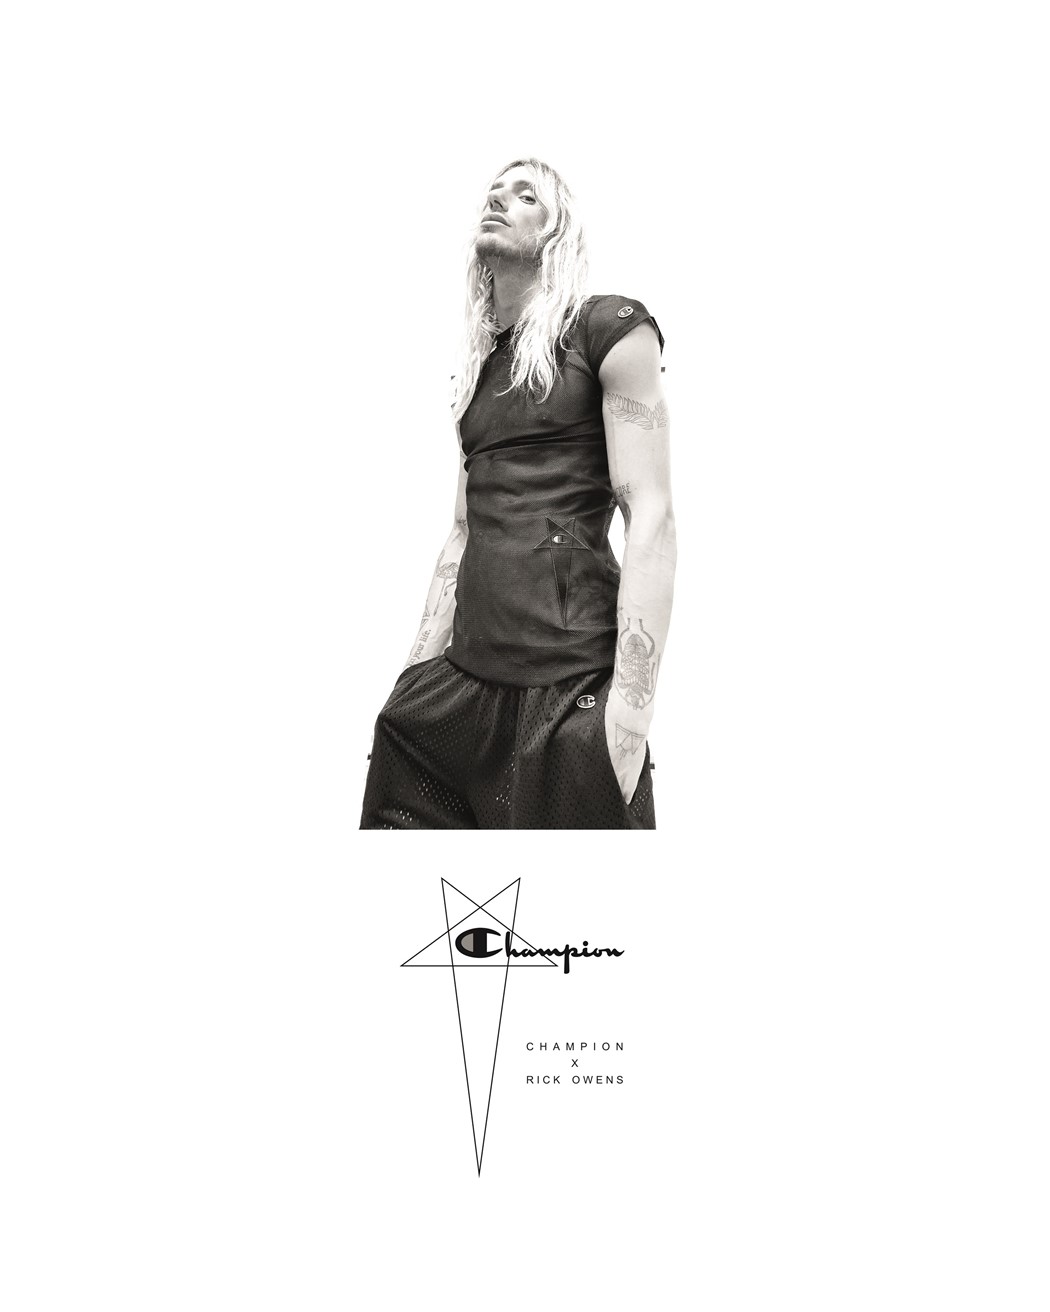 rick-owens-champion-launch-date-march-2020 (14)